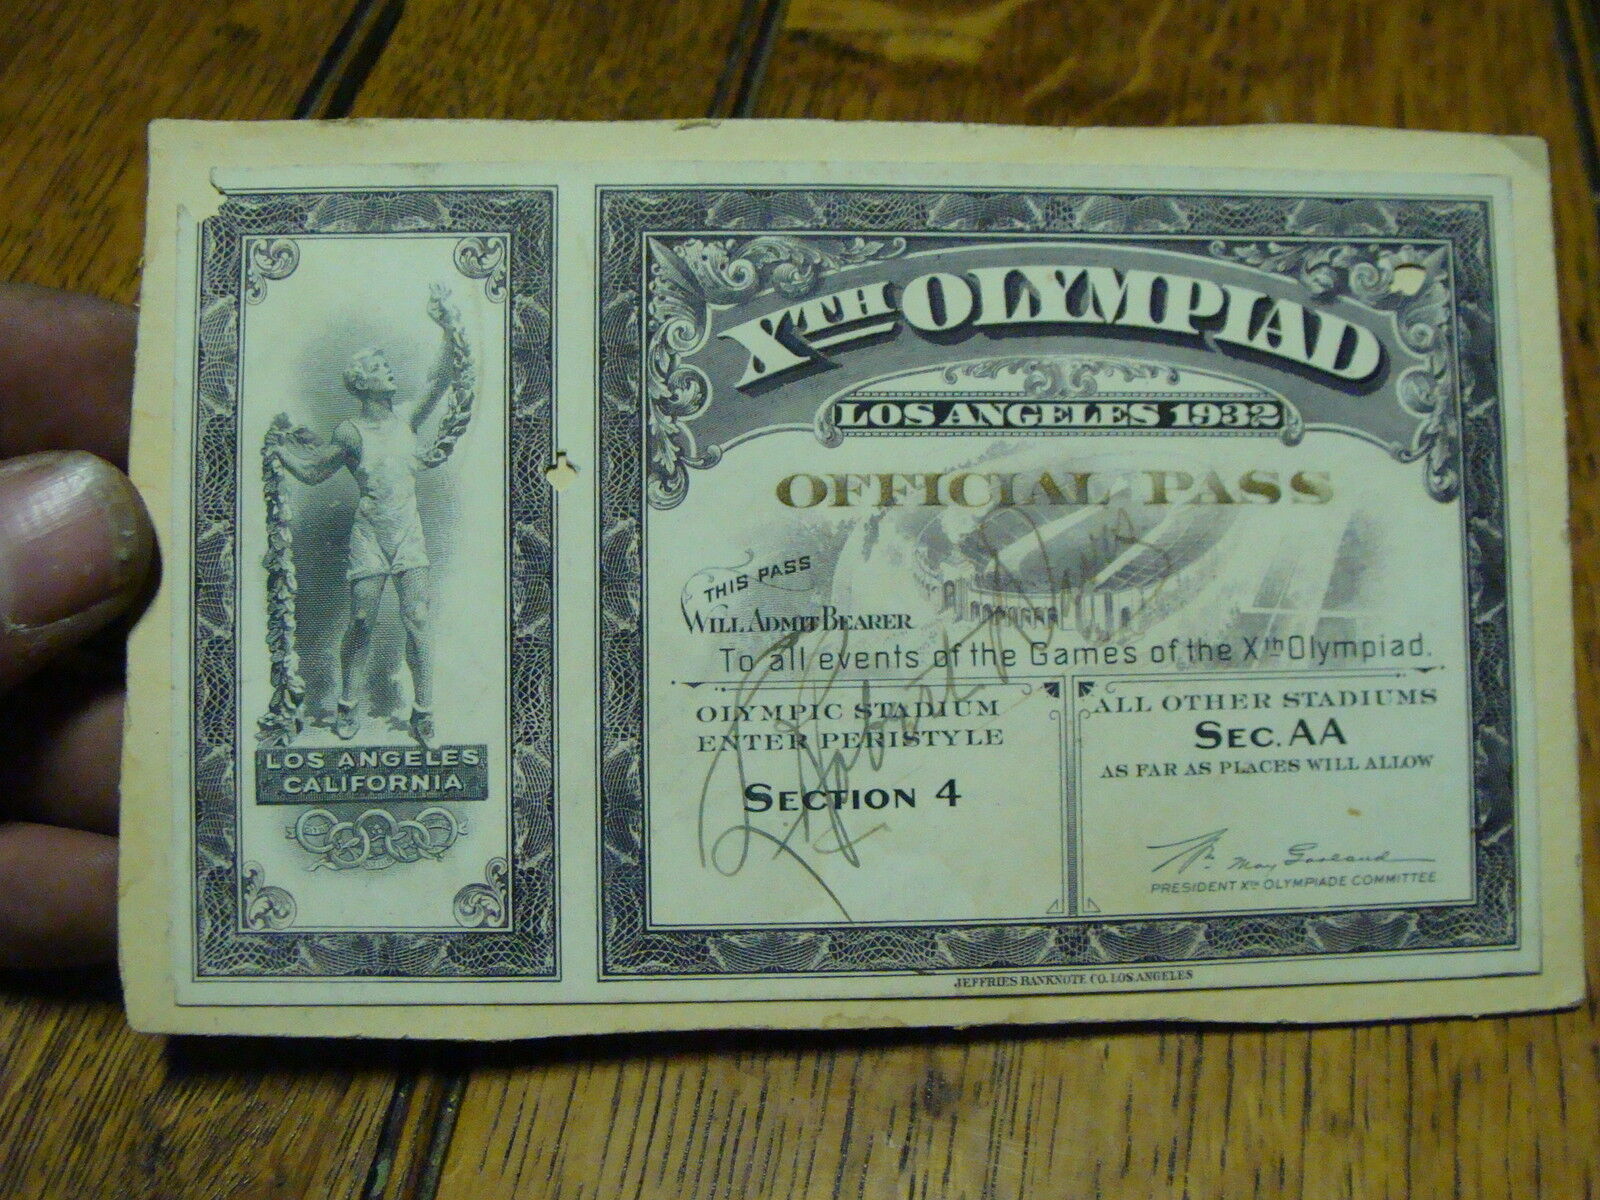 1932 Los Angeles Xth OLYMPIAD--official pass to ALL events SUPER RARE